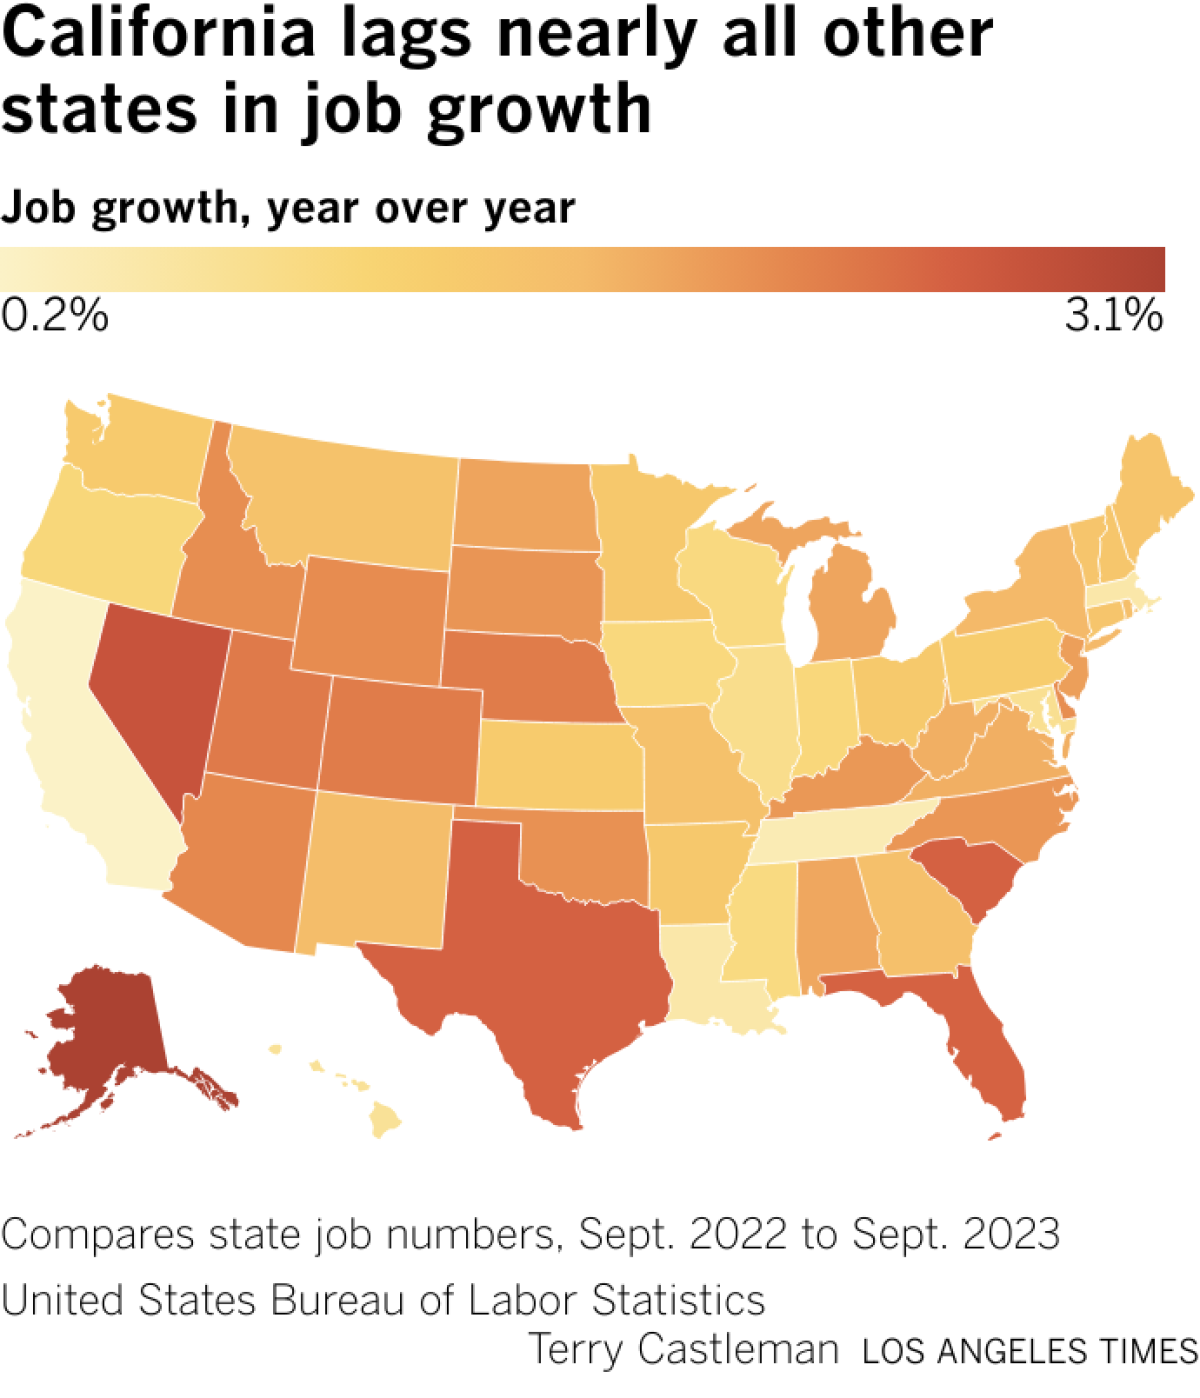 California lags nearly all other states in job growth